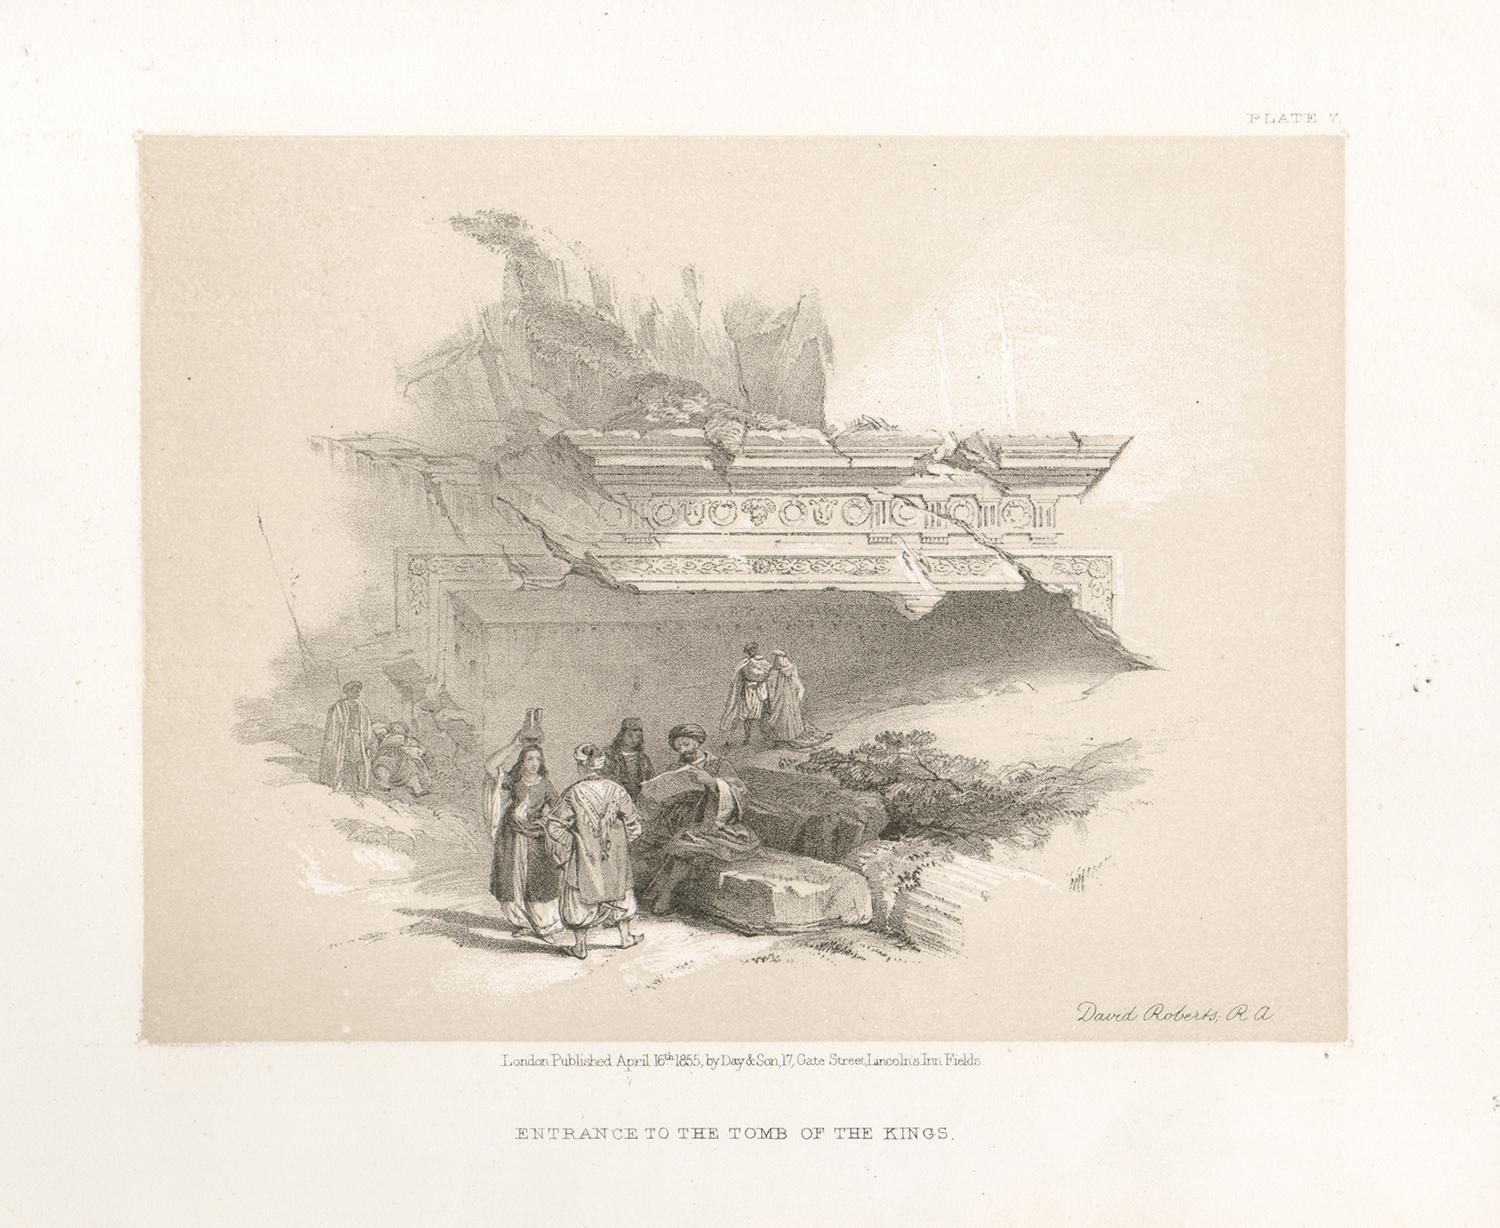 Entrance to the Tomb of the Kings. Tinted lithograph after David Roberts, 1855.